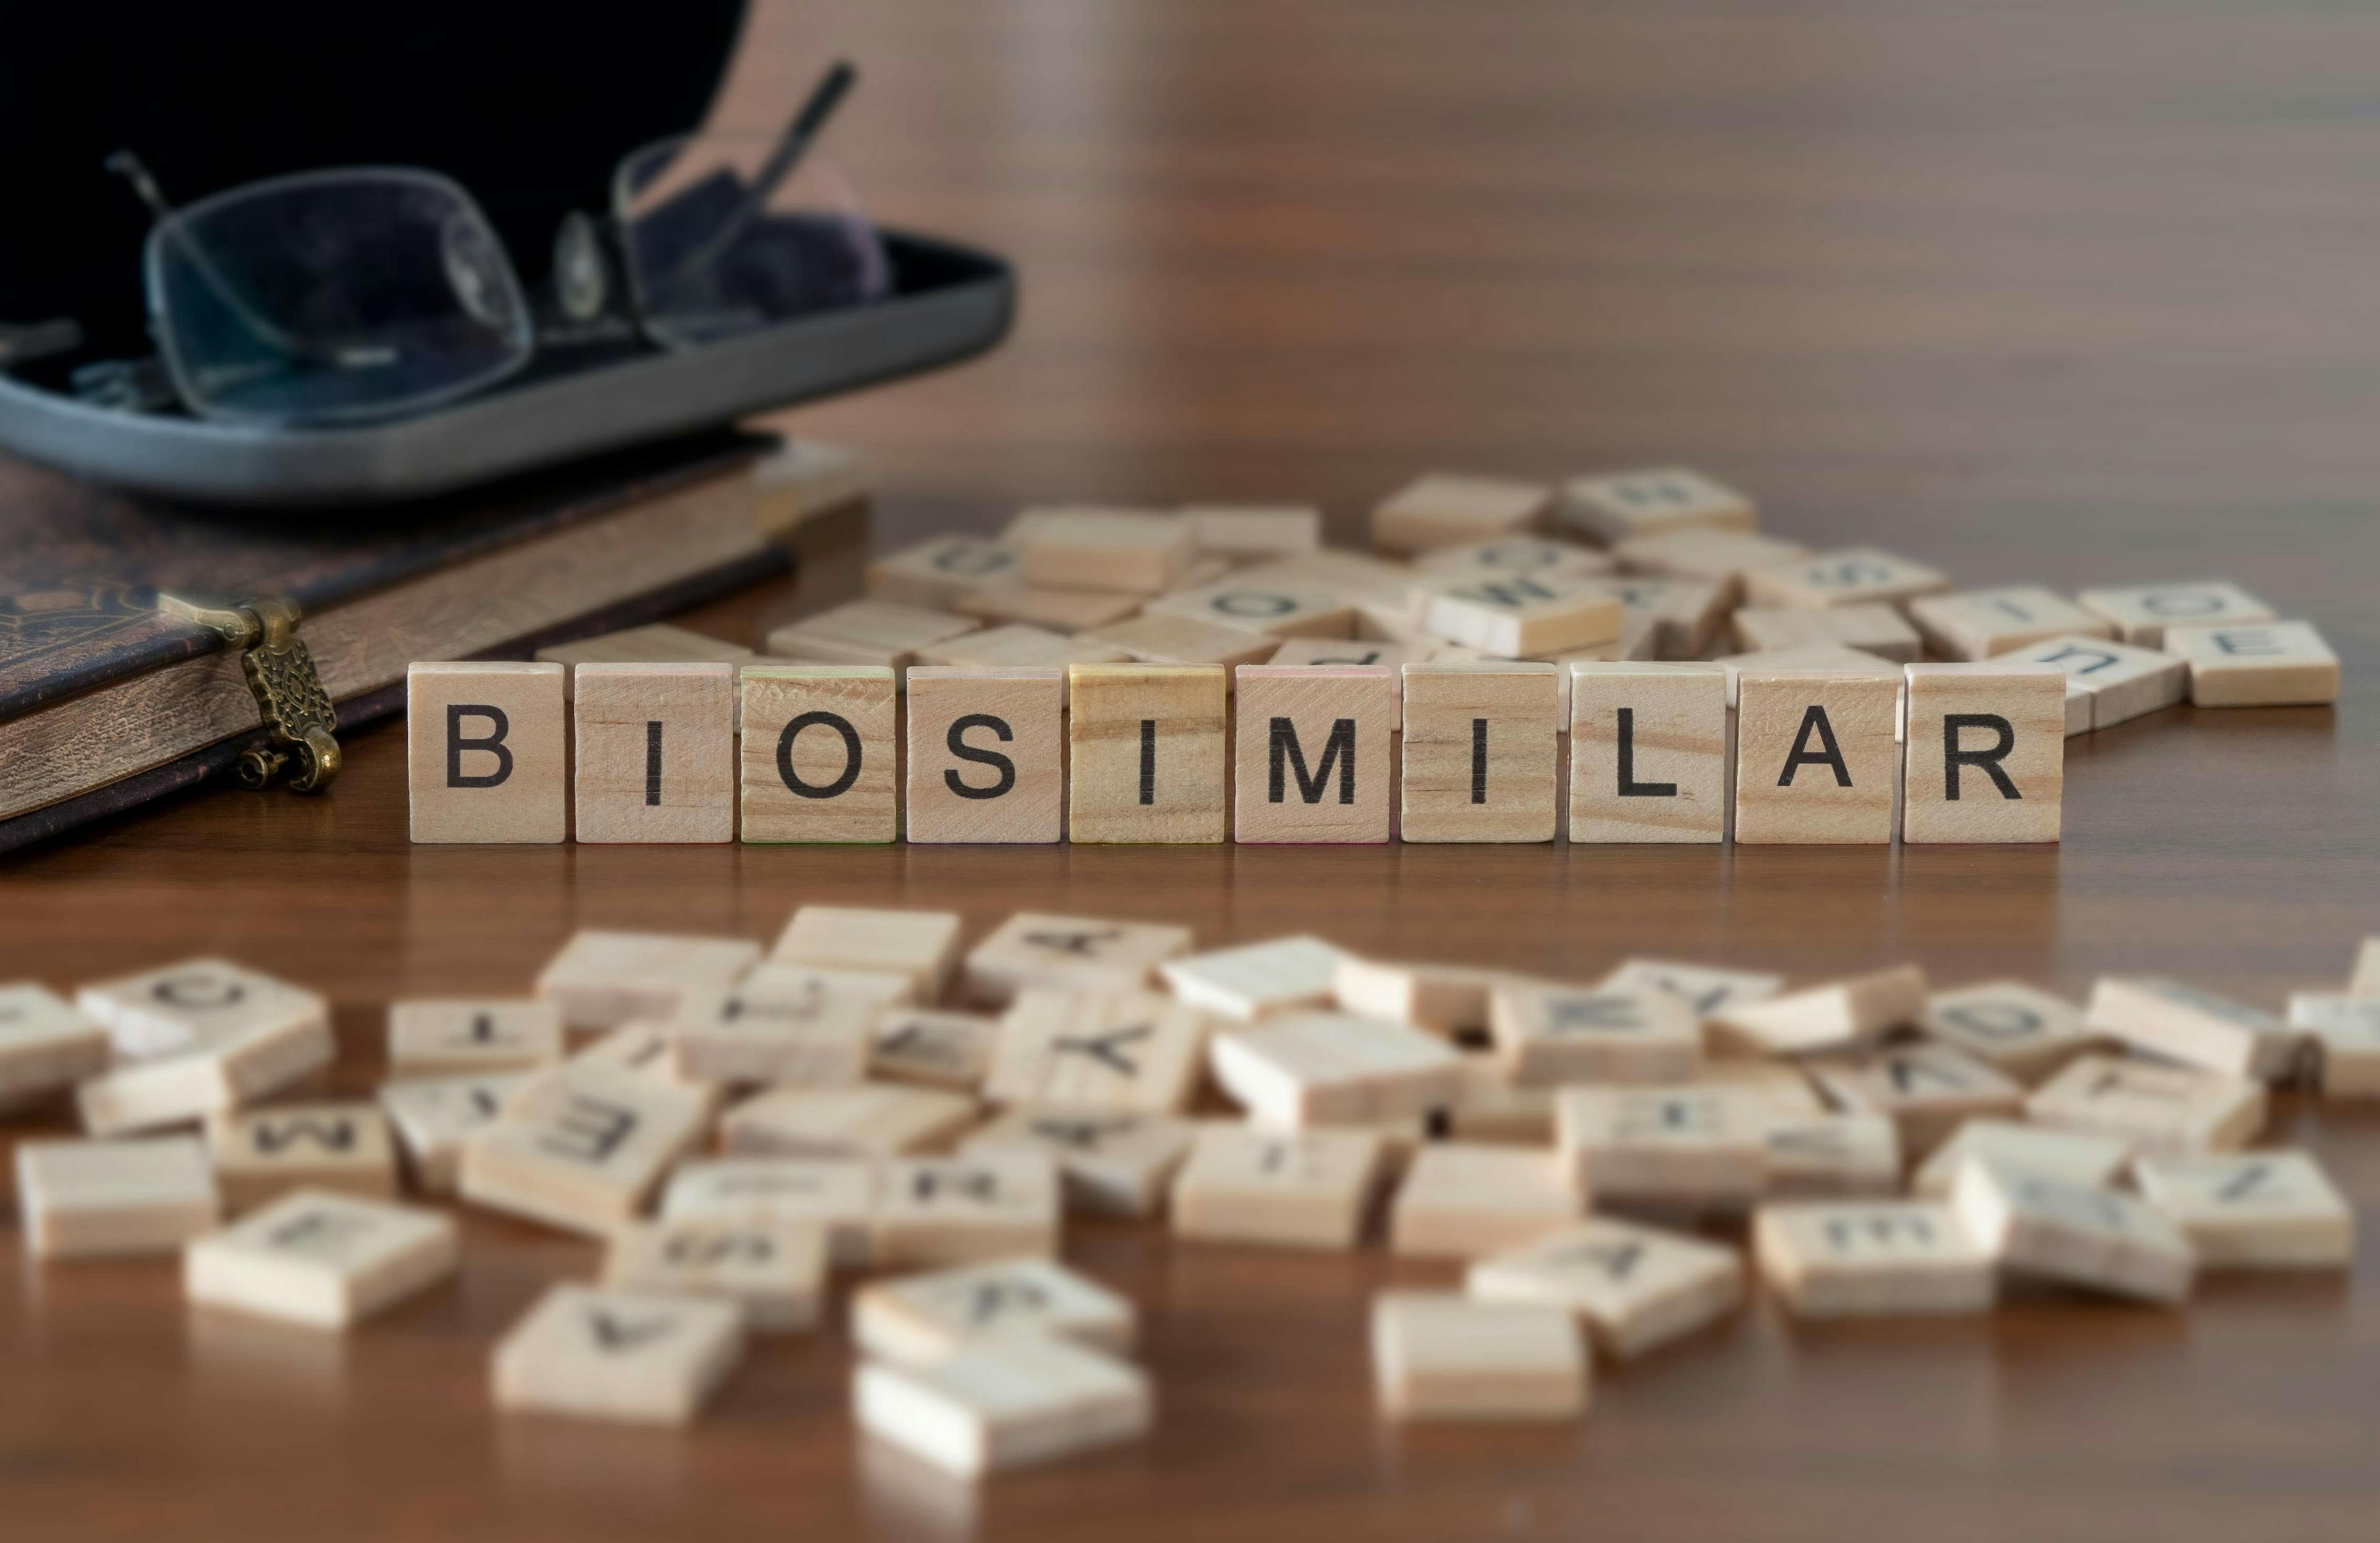 biosimilar word or concept represented by wooden letter tiles on a wooden table with glasses and a book | Image Credit: lexiconimages - stock.adobe.com